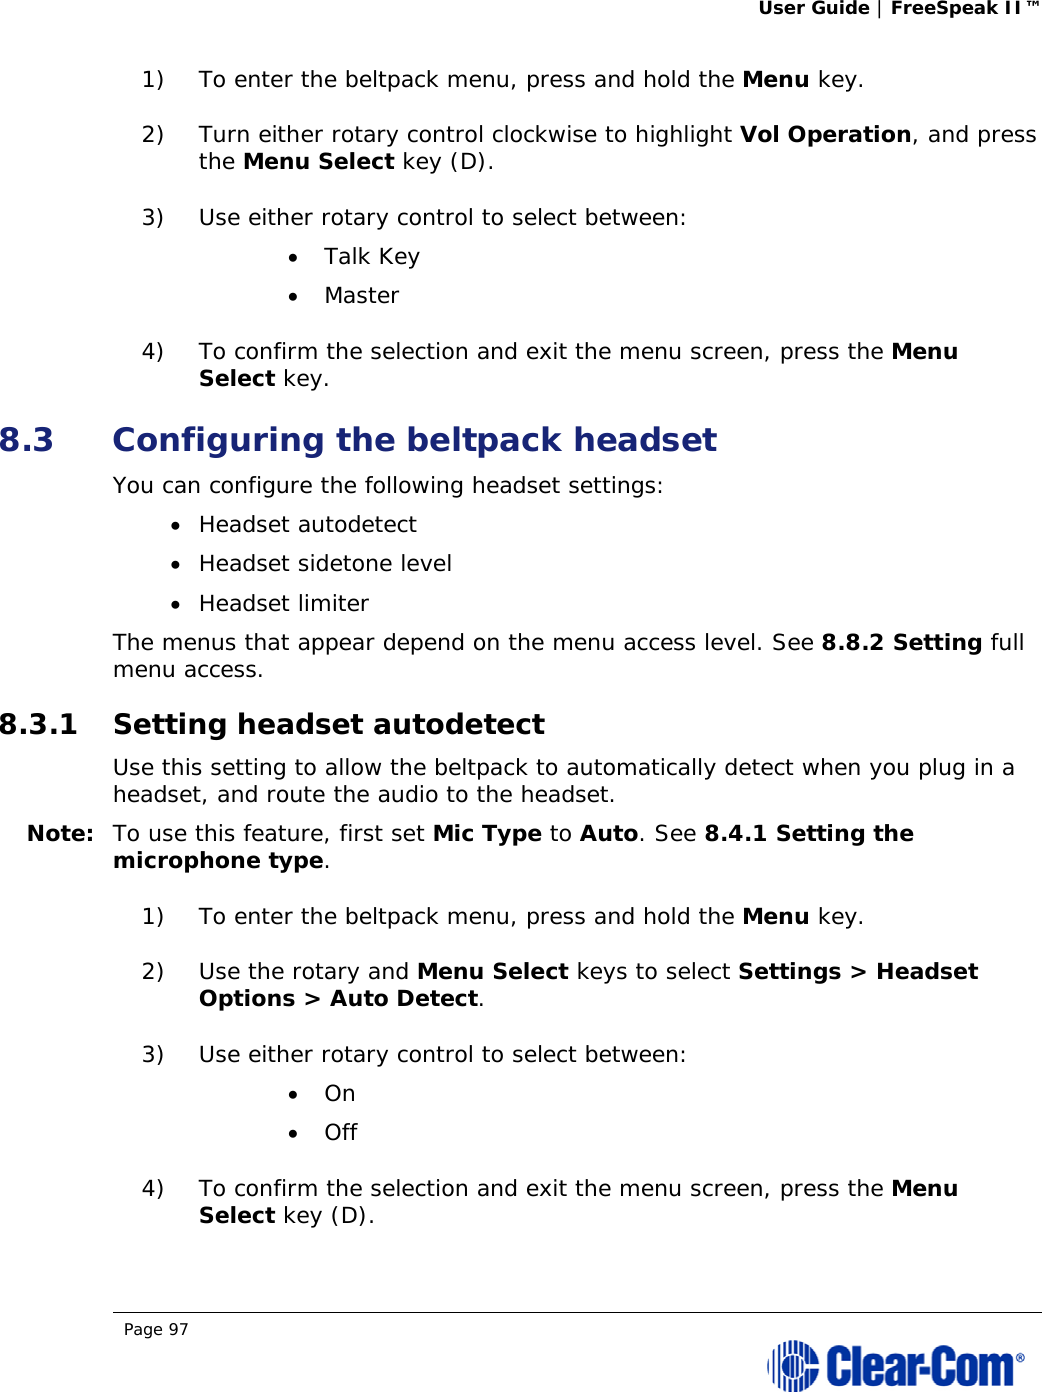 User Guide | FreeSpeak II™  Page 97  1) To enter the beltpack menu, press and hold the Menu key. 2) Turn either rotary control clockwise to highlight Vol Operation, and press the Menu Select key (D). 3) Use either rotary control to select between:  Talk Key  Master 4) To confirm the selection and exit the menu screen, press the Menu Select key. 8.3 Configuring the beltpack headset You can configure the following headset settings:  Headset autodetect  Headset sidetone level  Headset limiter The menus that appear depend on the menu access level. See 8.8.2 Setting full menu access. 8.3.1 Setting headset autodetect Use this setting to allow the beltpack to automatically detect when you plug in a headset, and route the audio to the headset. Note: To use this feature, first set Mic Type to Auto. See 8.4.1 Setting the microphone type. 1) To enter the beltpack menu, press and hold the Menu key. 2) Use the rotary and Menu Select keys to select Settings &gt; Headset Options &gt; Auto Detect. 3) Use either rotary control to select between:  On  Off 4) To confirm the selection and exit the menu screen, press the Menu Select key (D). 